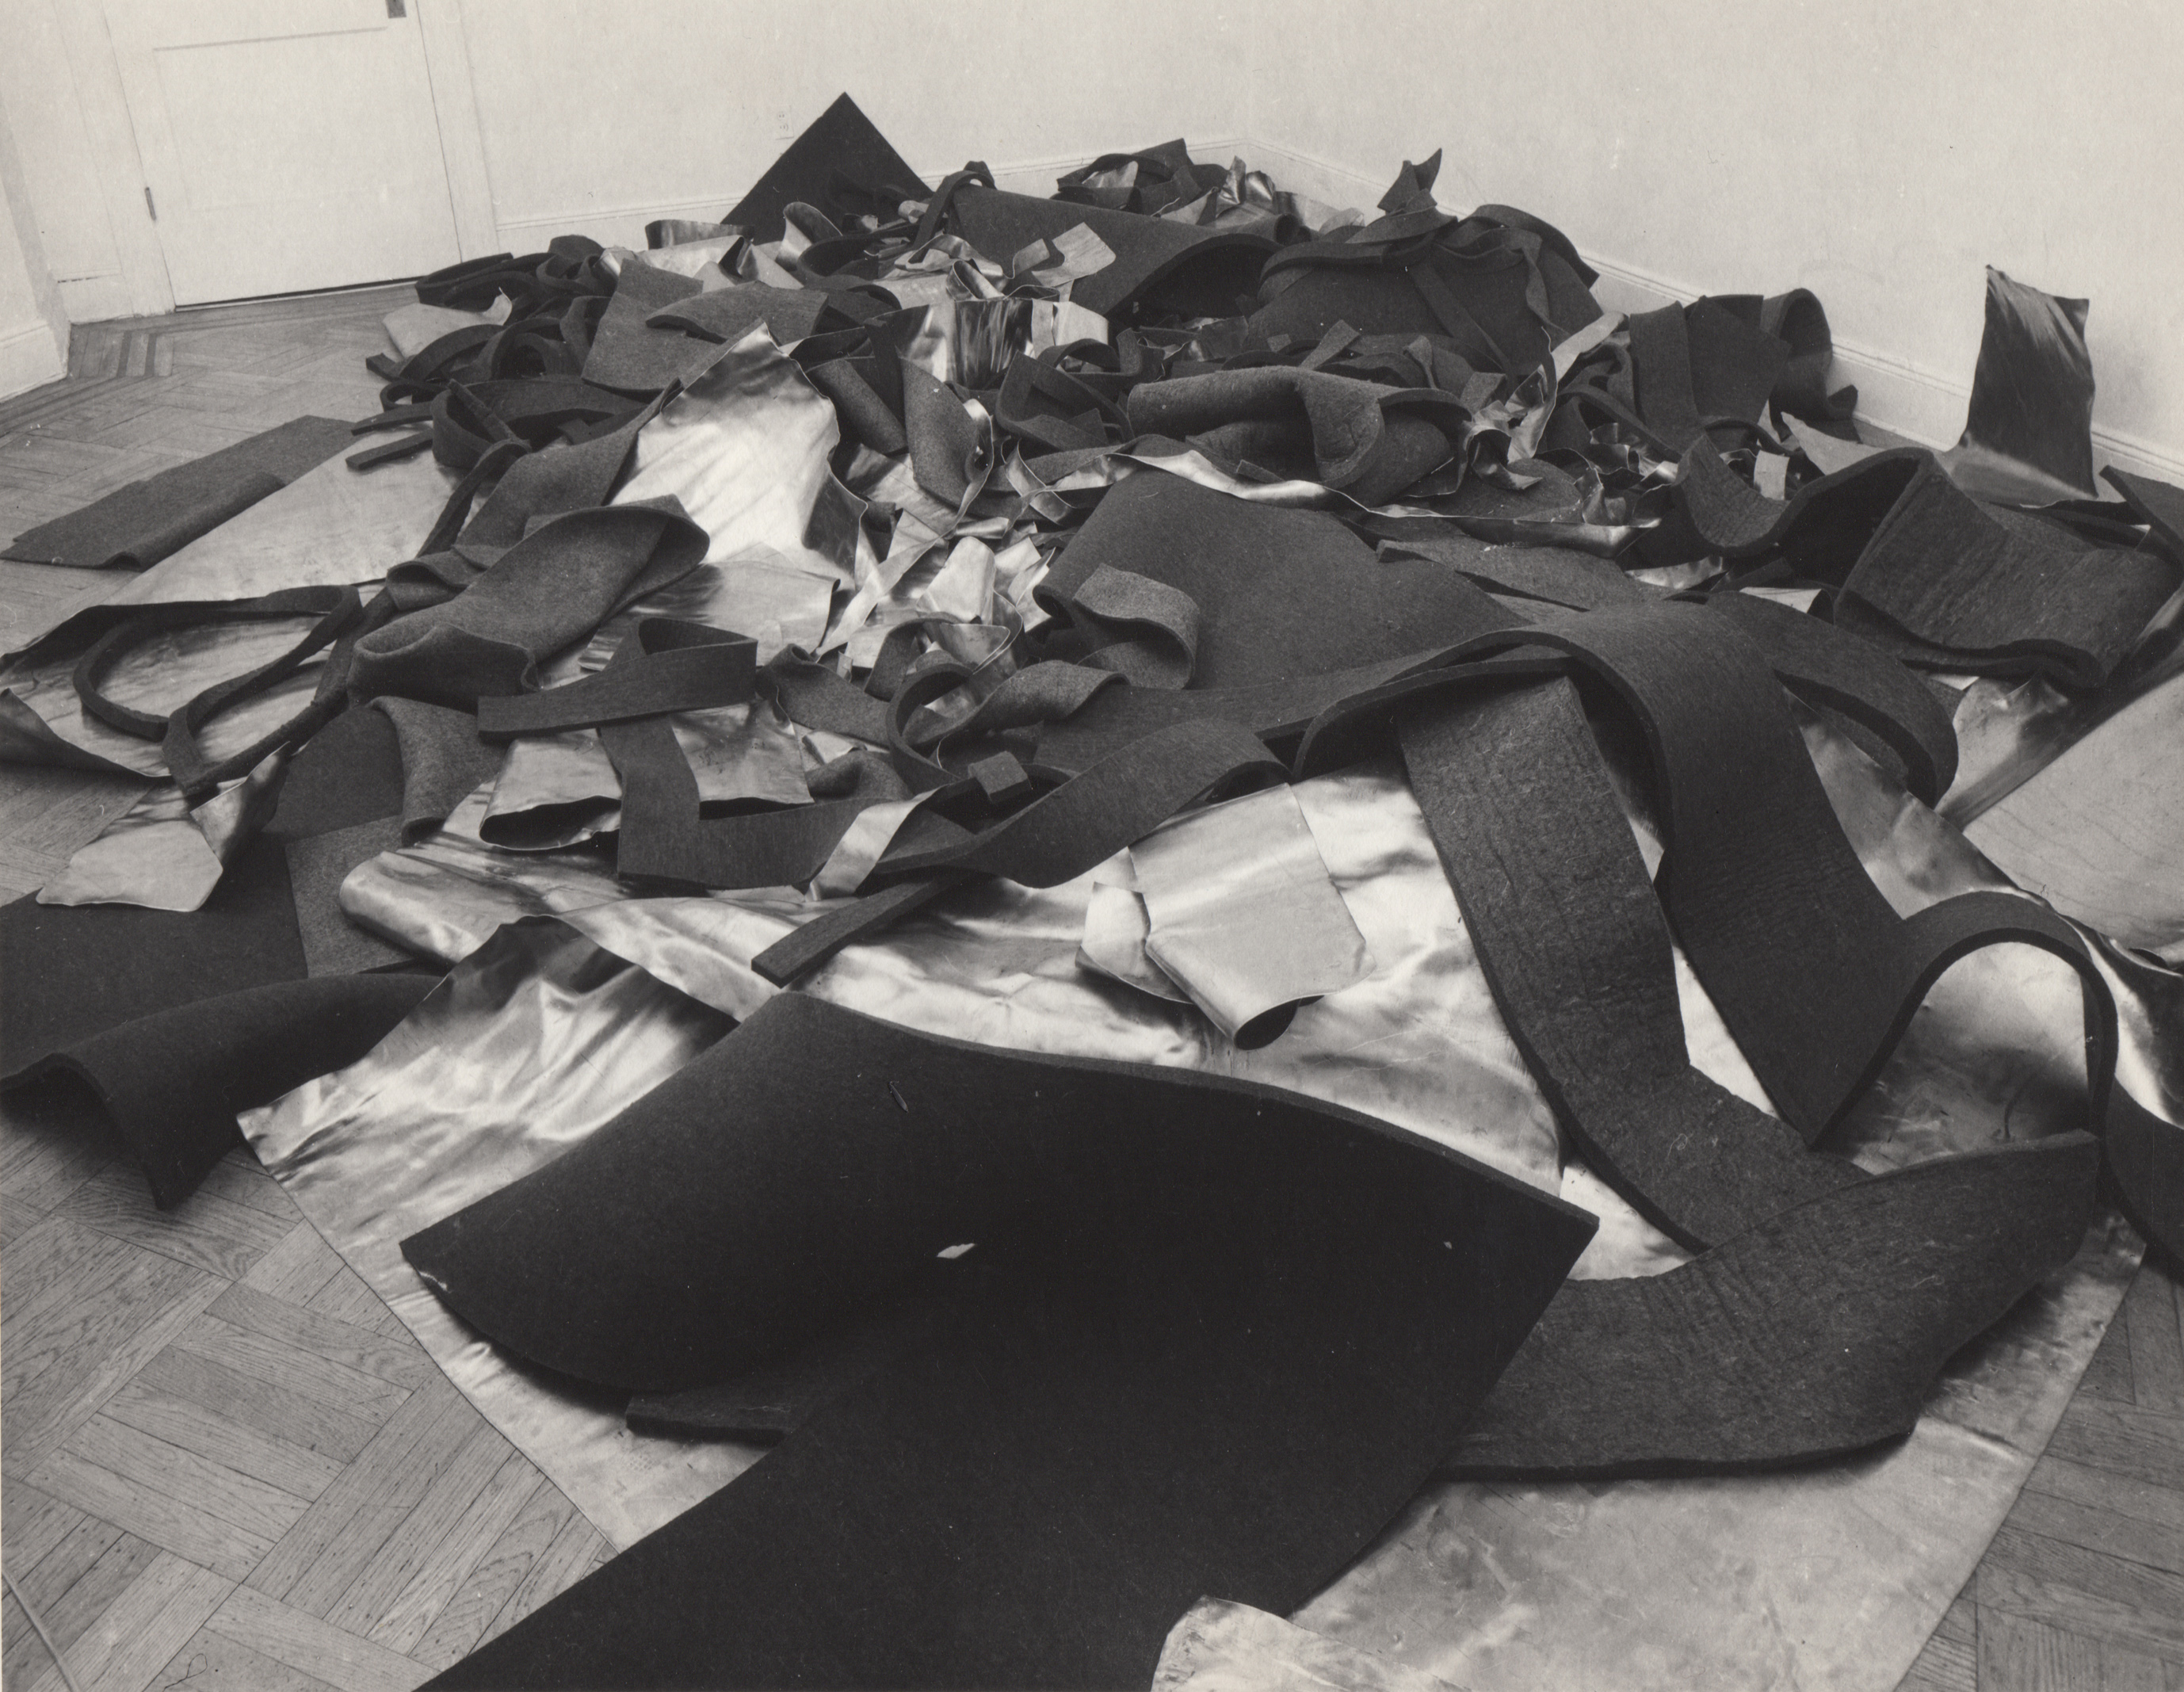 Robert Morris' 'Lead and Felt' (1969), installation view, Castelli Gallery, New York. | © ROBERT MORRIS / ARTISTS RIGHTS SOCIETY (ARS), NEW YORK; COURTESY OF THE ARTIST AND BLUM  & POE, LOS ANGELES / NEW YORK / TOKYO